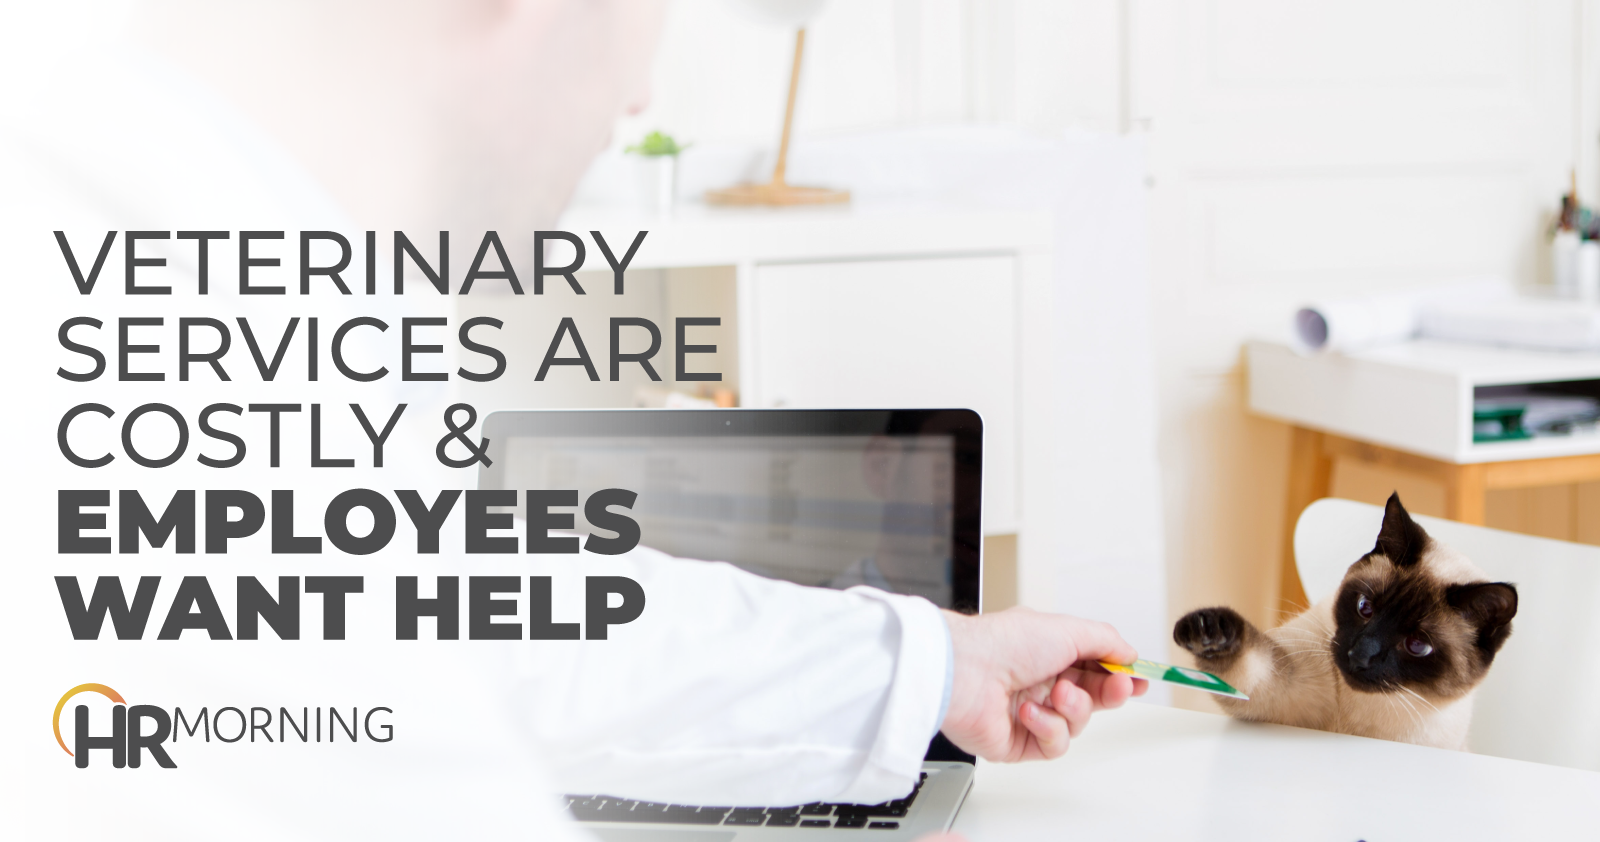 Veterinary Services Are Costly & Employees Want Help